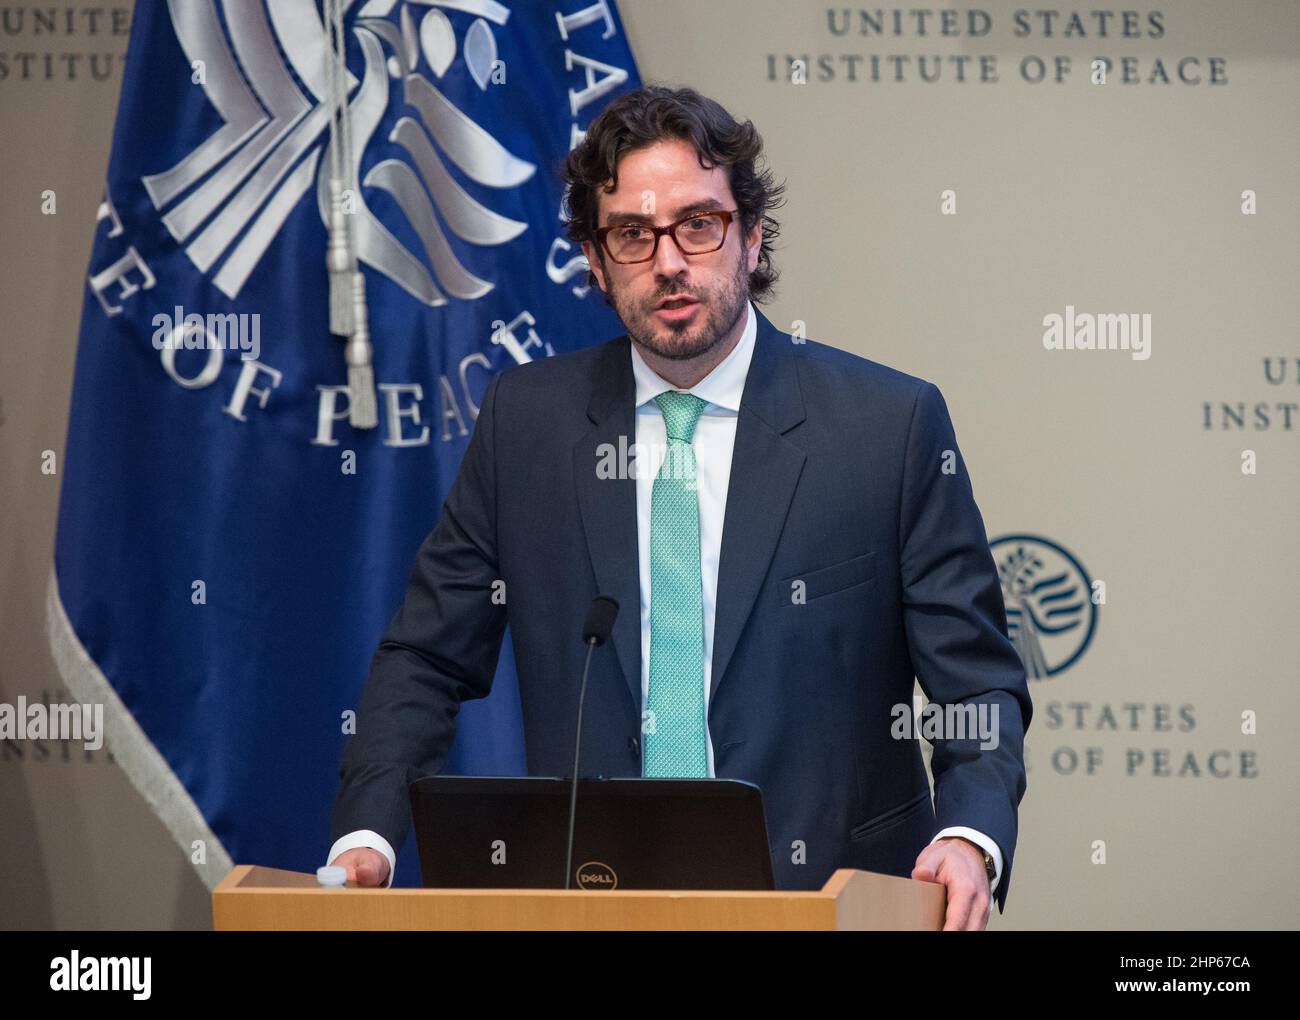 Dr. Pablo Vieira, Vice-Minister of Environment, Republic of Colombia,  speaking on Tuesday, June 9, 2015 at the U.S. Institute of Peace in Washington, DC. Stock Photo